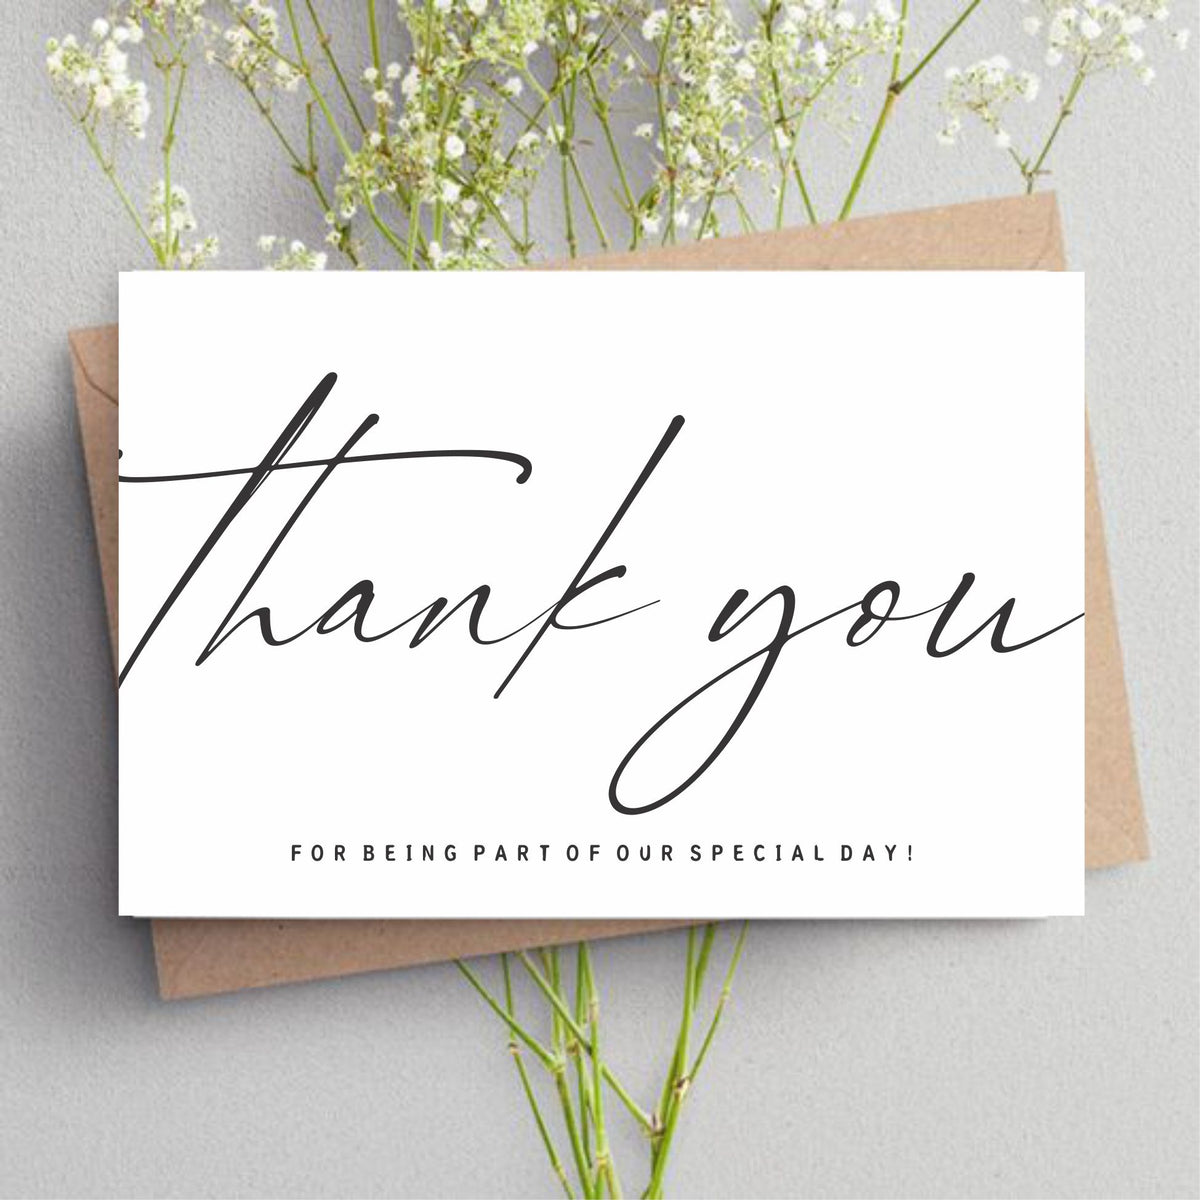 Personalised Wedding Thank You Cards with Envelope 6"x 4" 50 (Pack of 50) D1 - Willow